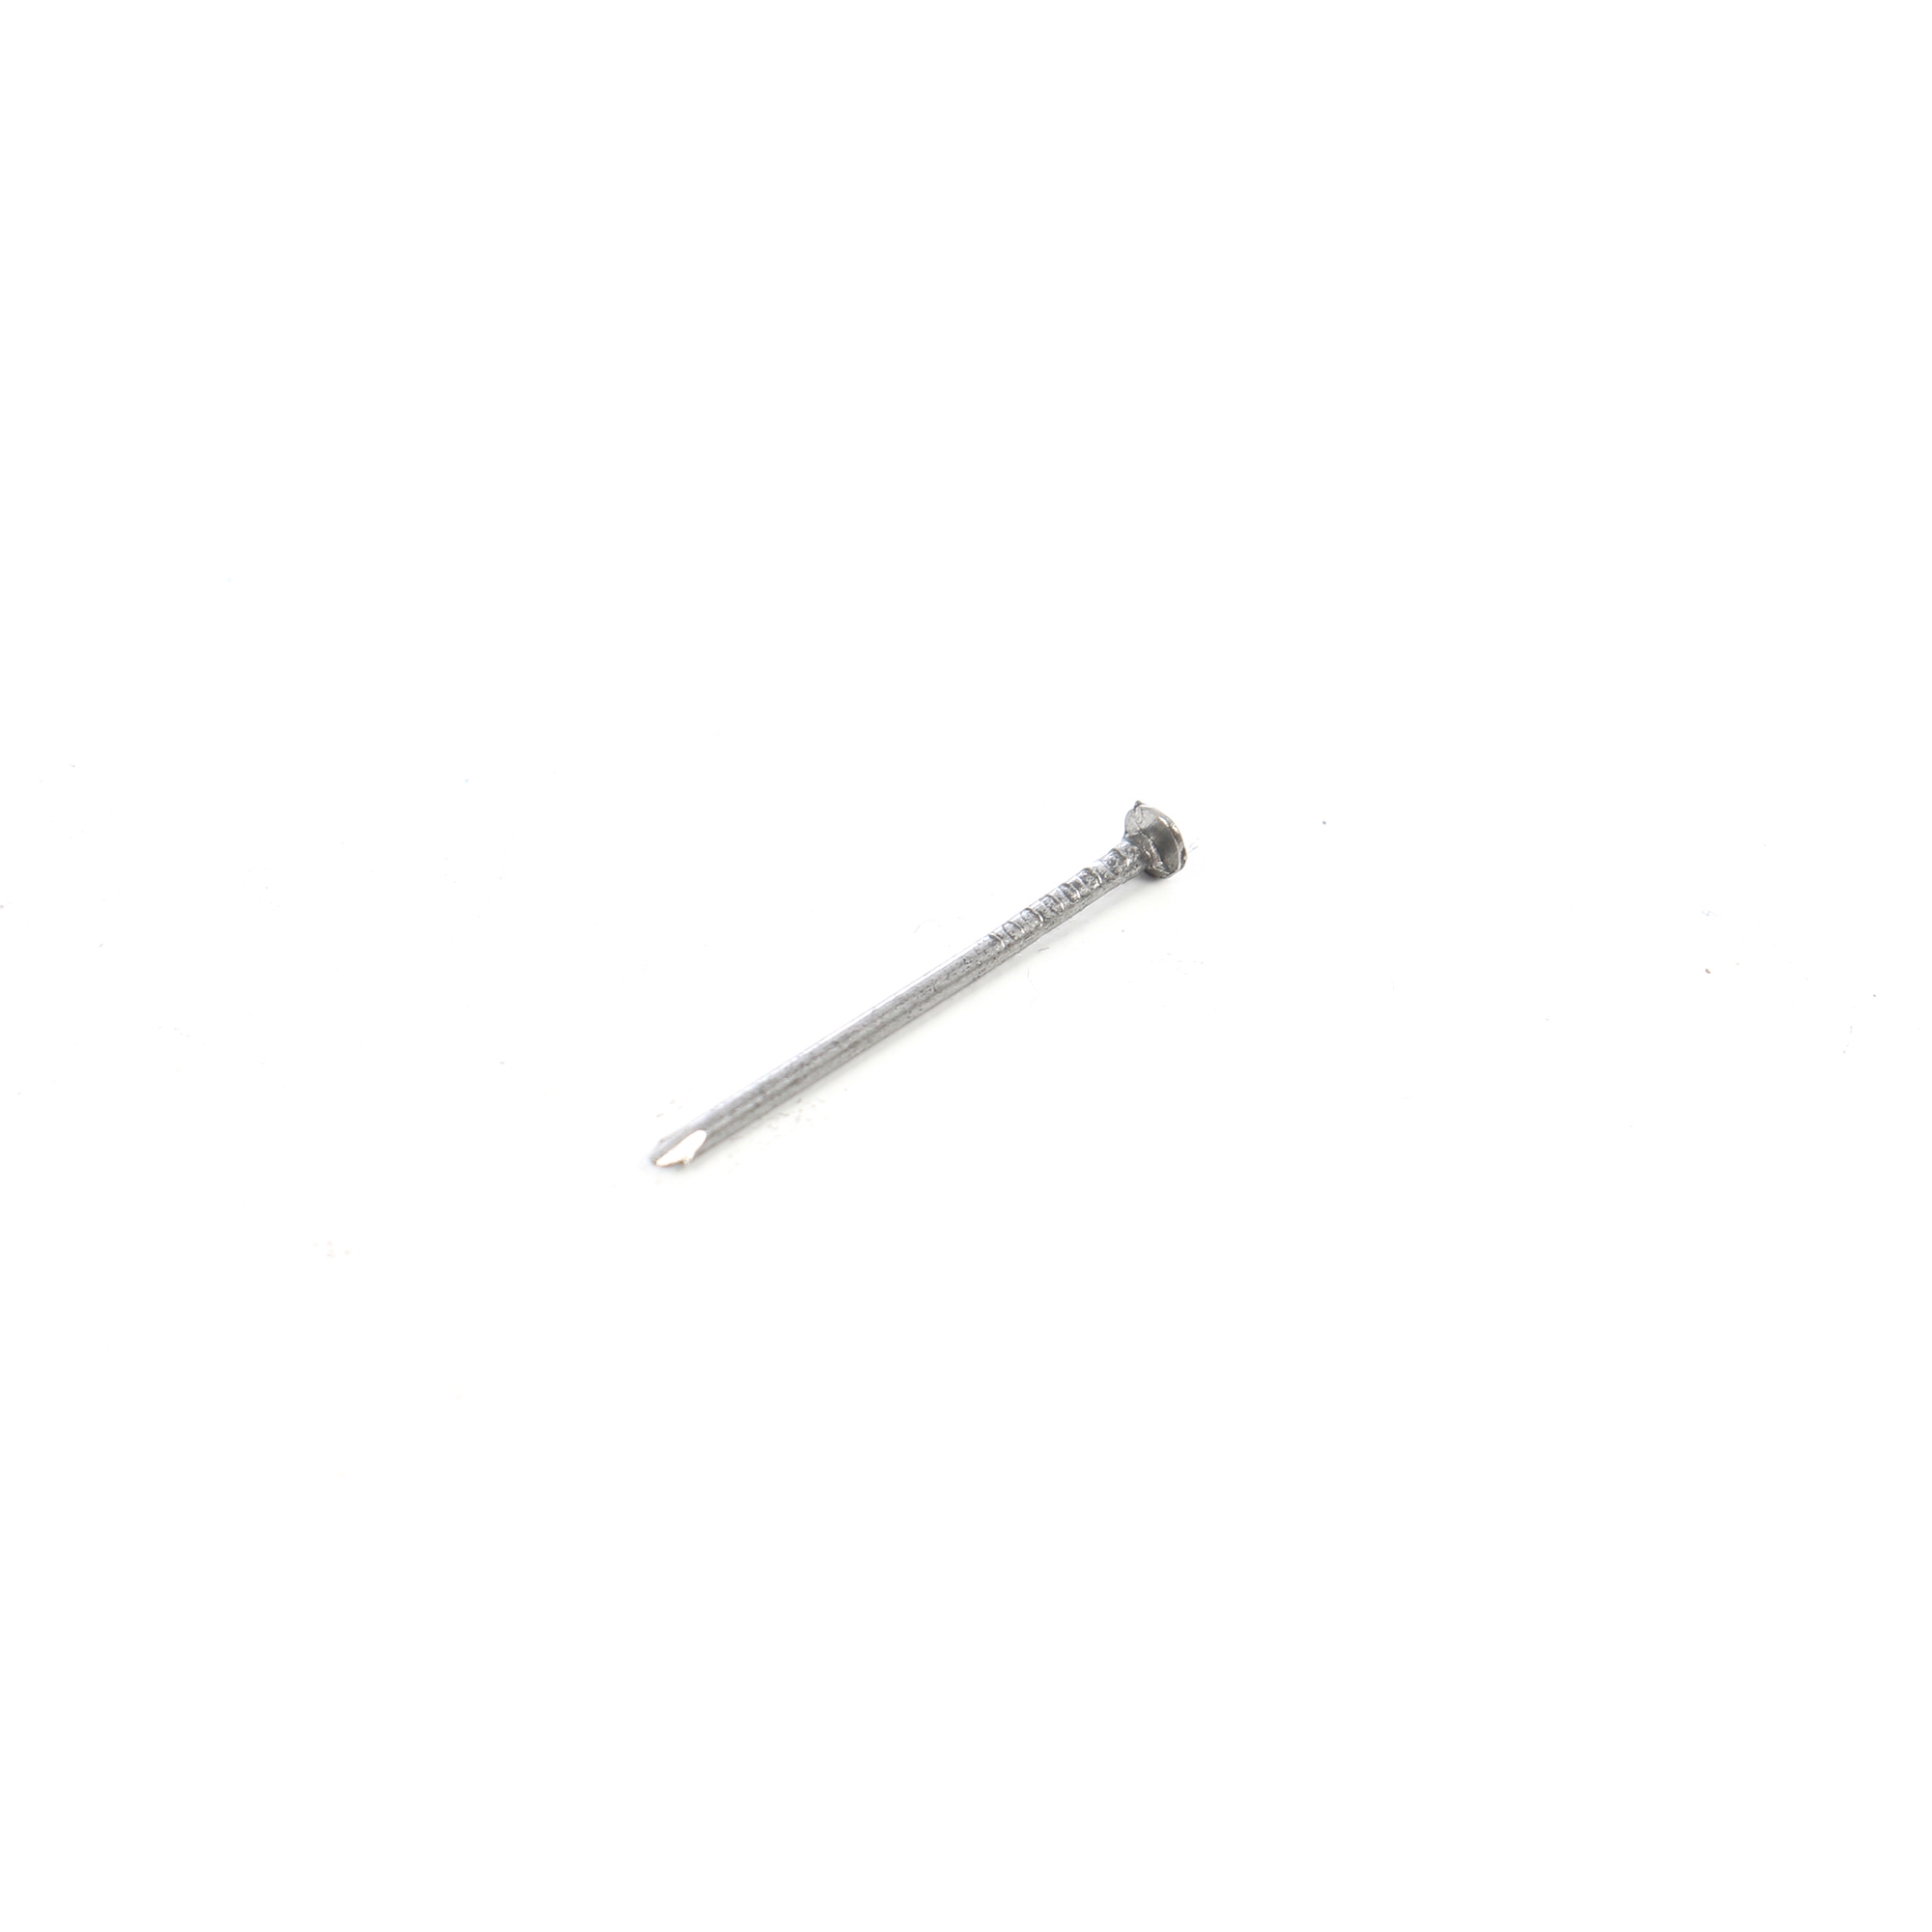 Cuie constructii, din otel, 1.4 x 20 mm, 100 g